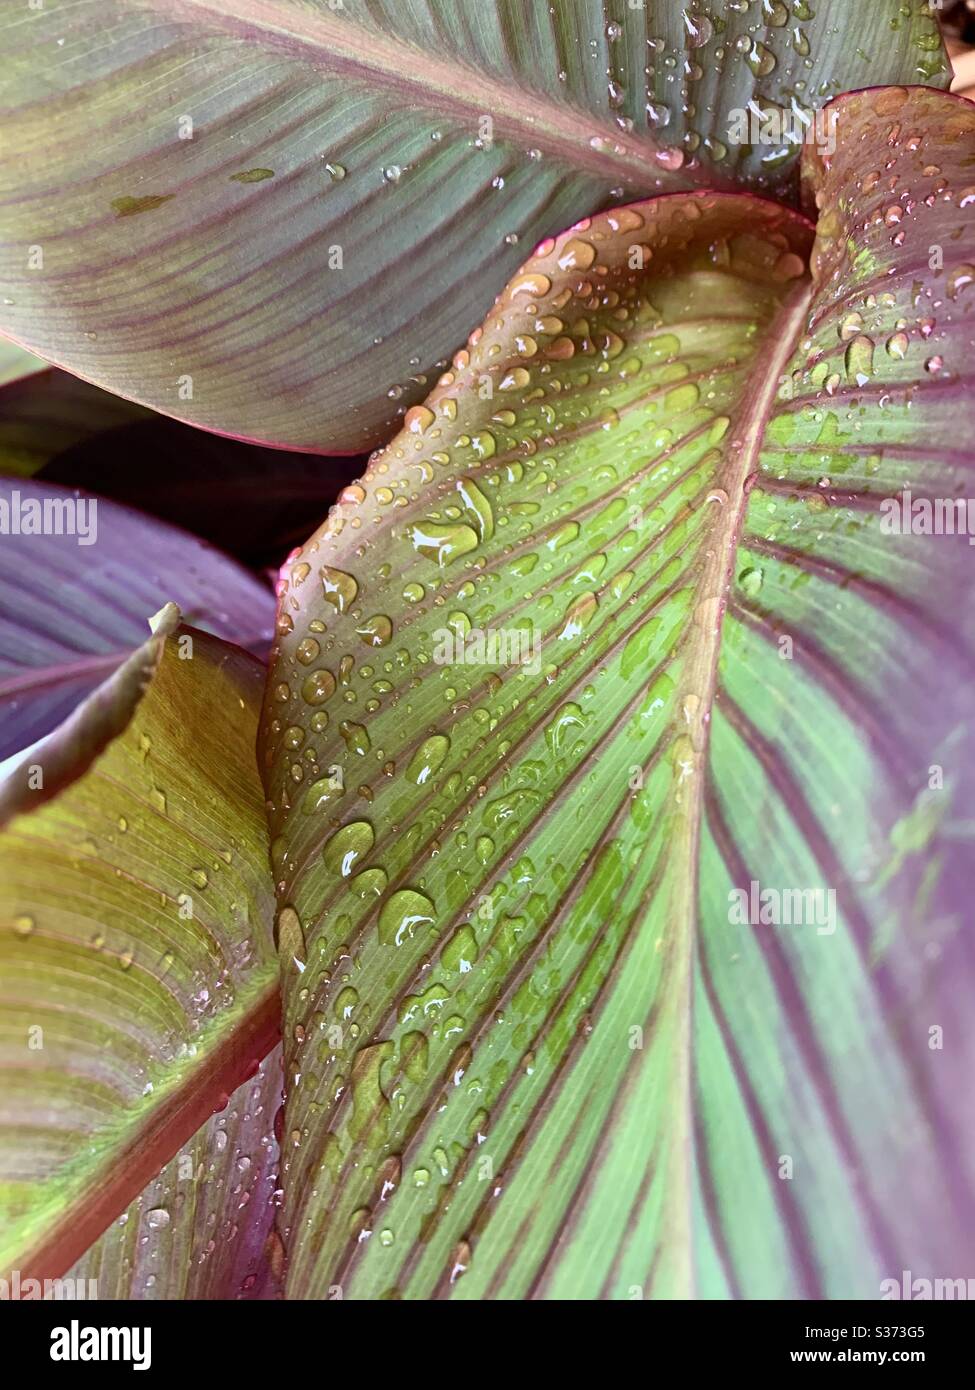 Wet leaves of Ganyong plant Stock Photo